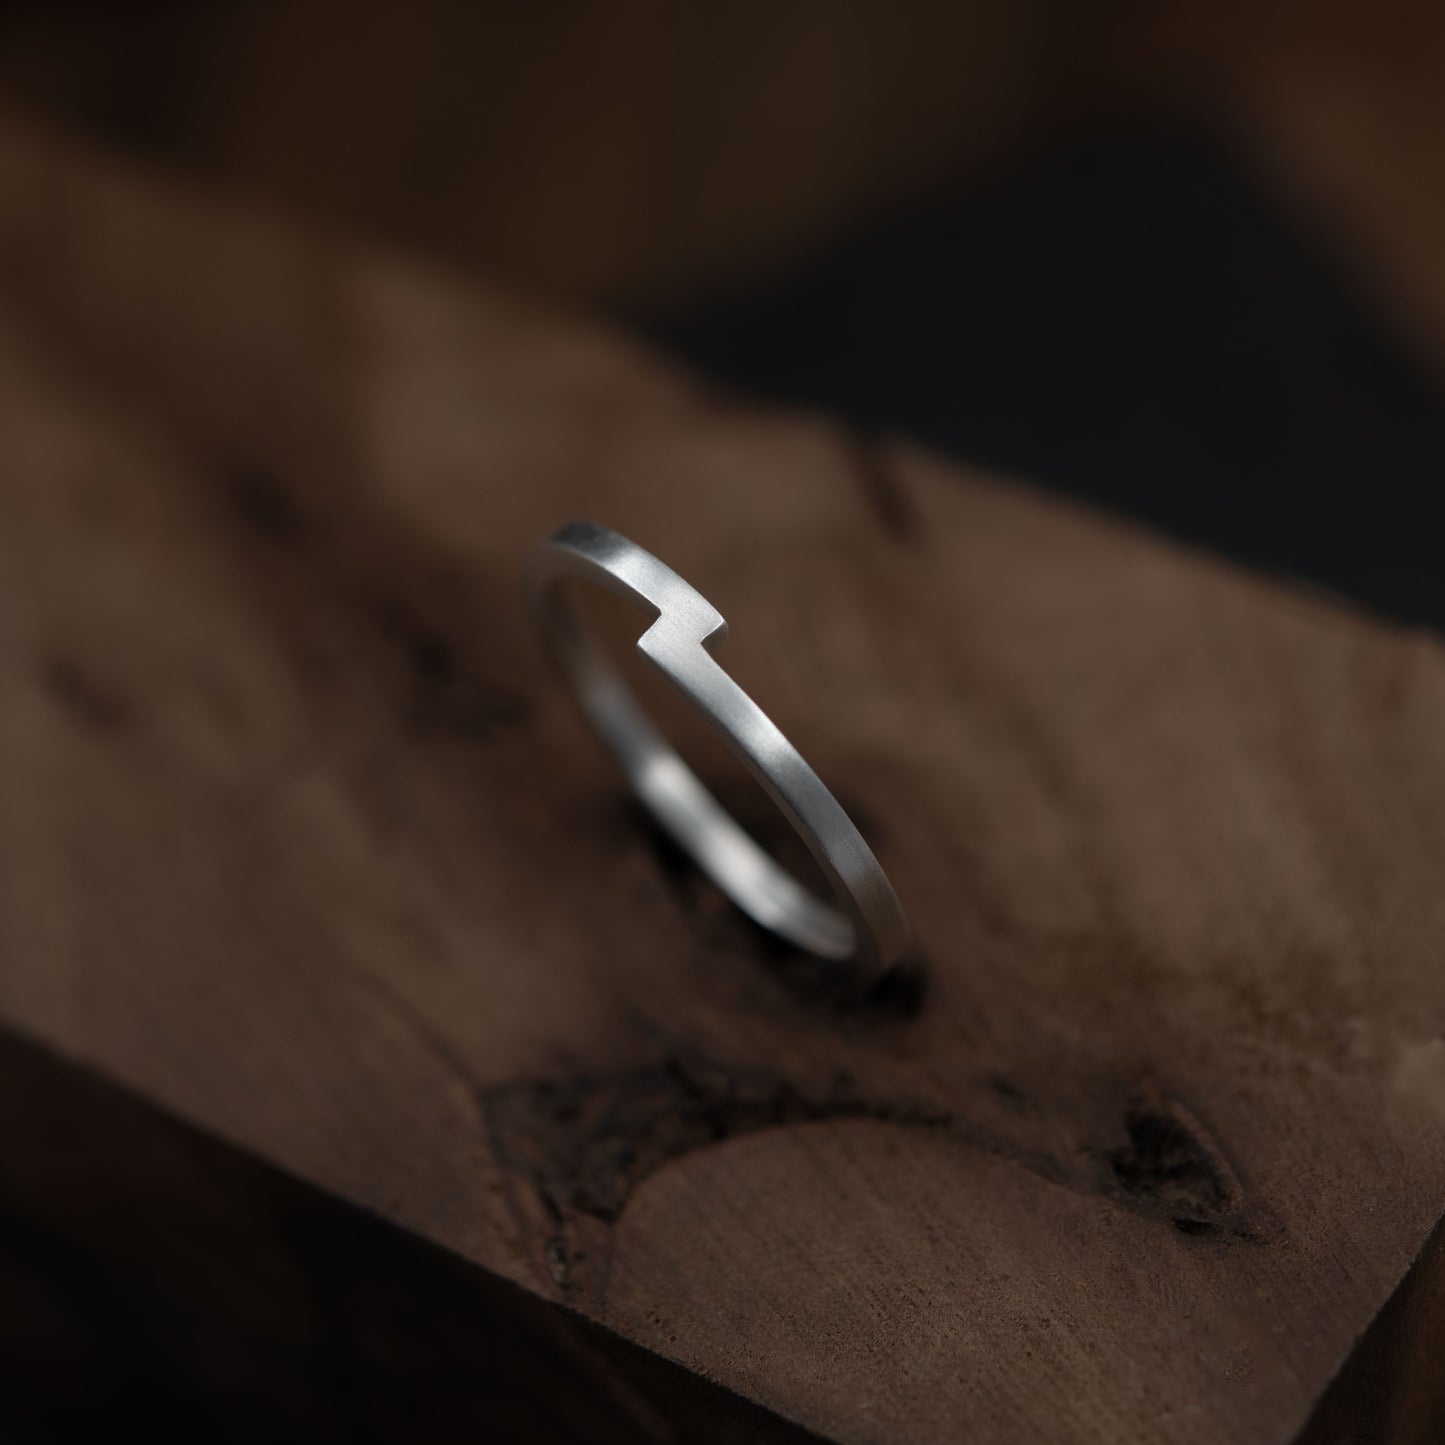 Minimalistic band silver ring. Crafted by hand by a g j c from a 1,5 mm square shape band of solid sterling silver.